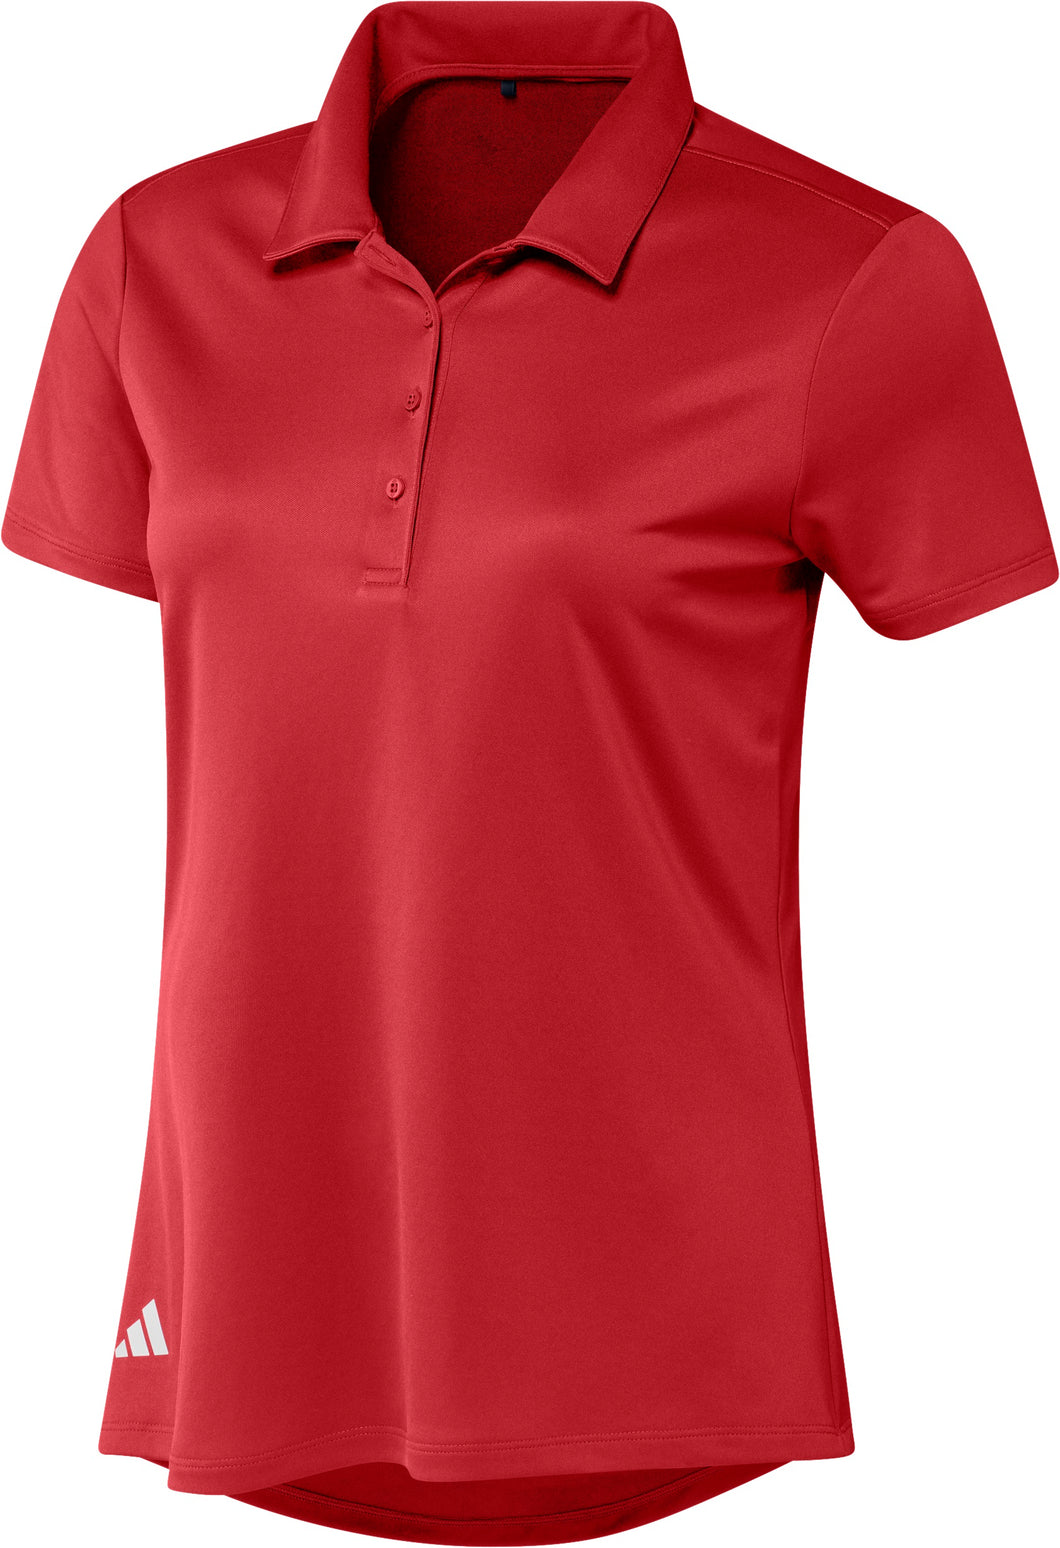 Women's Solid Performance Polo (4 Colors)